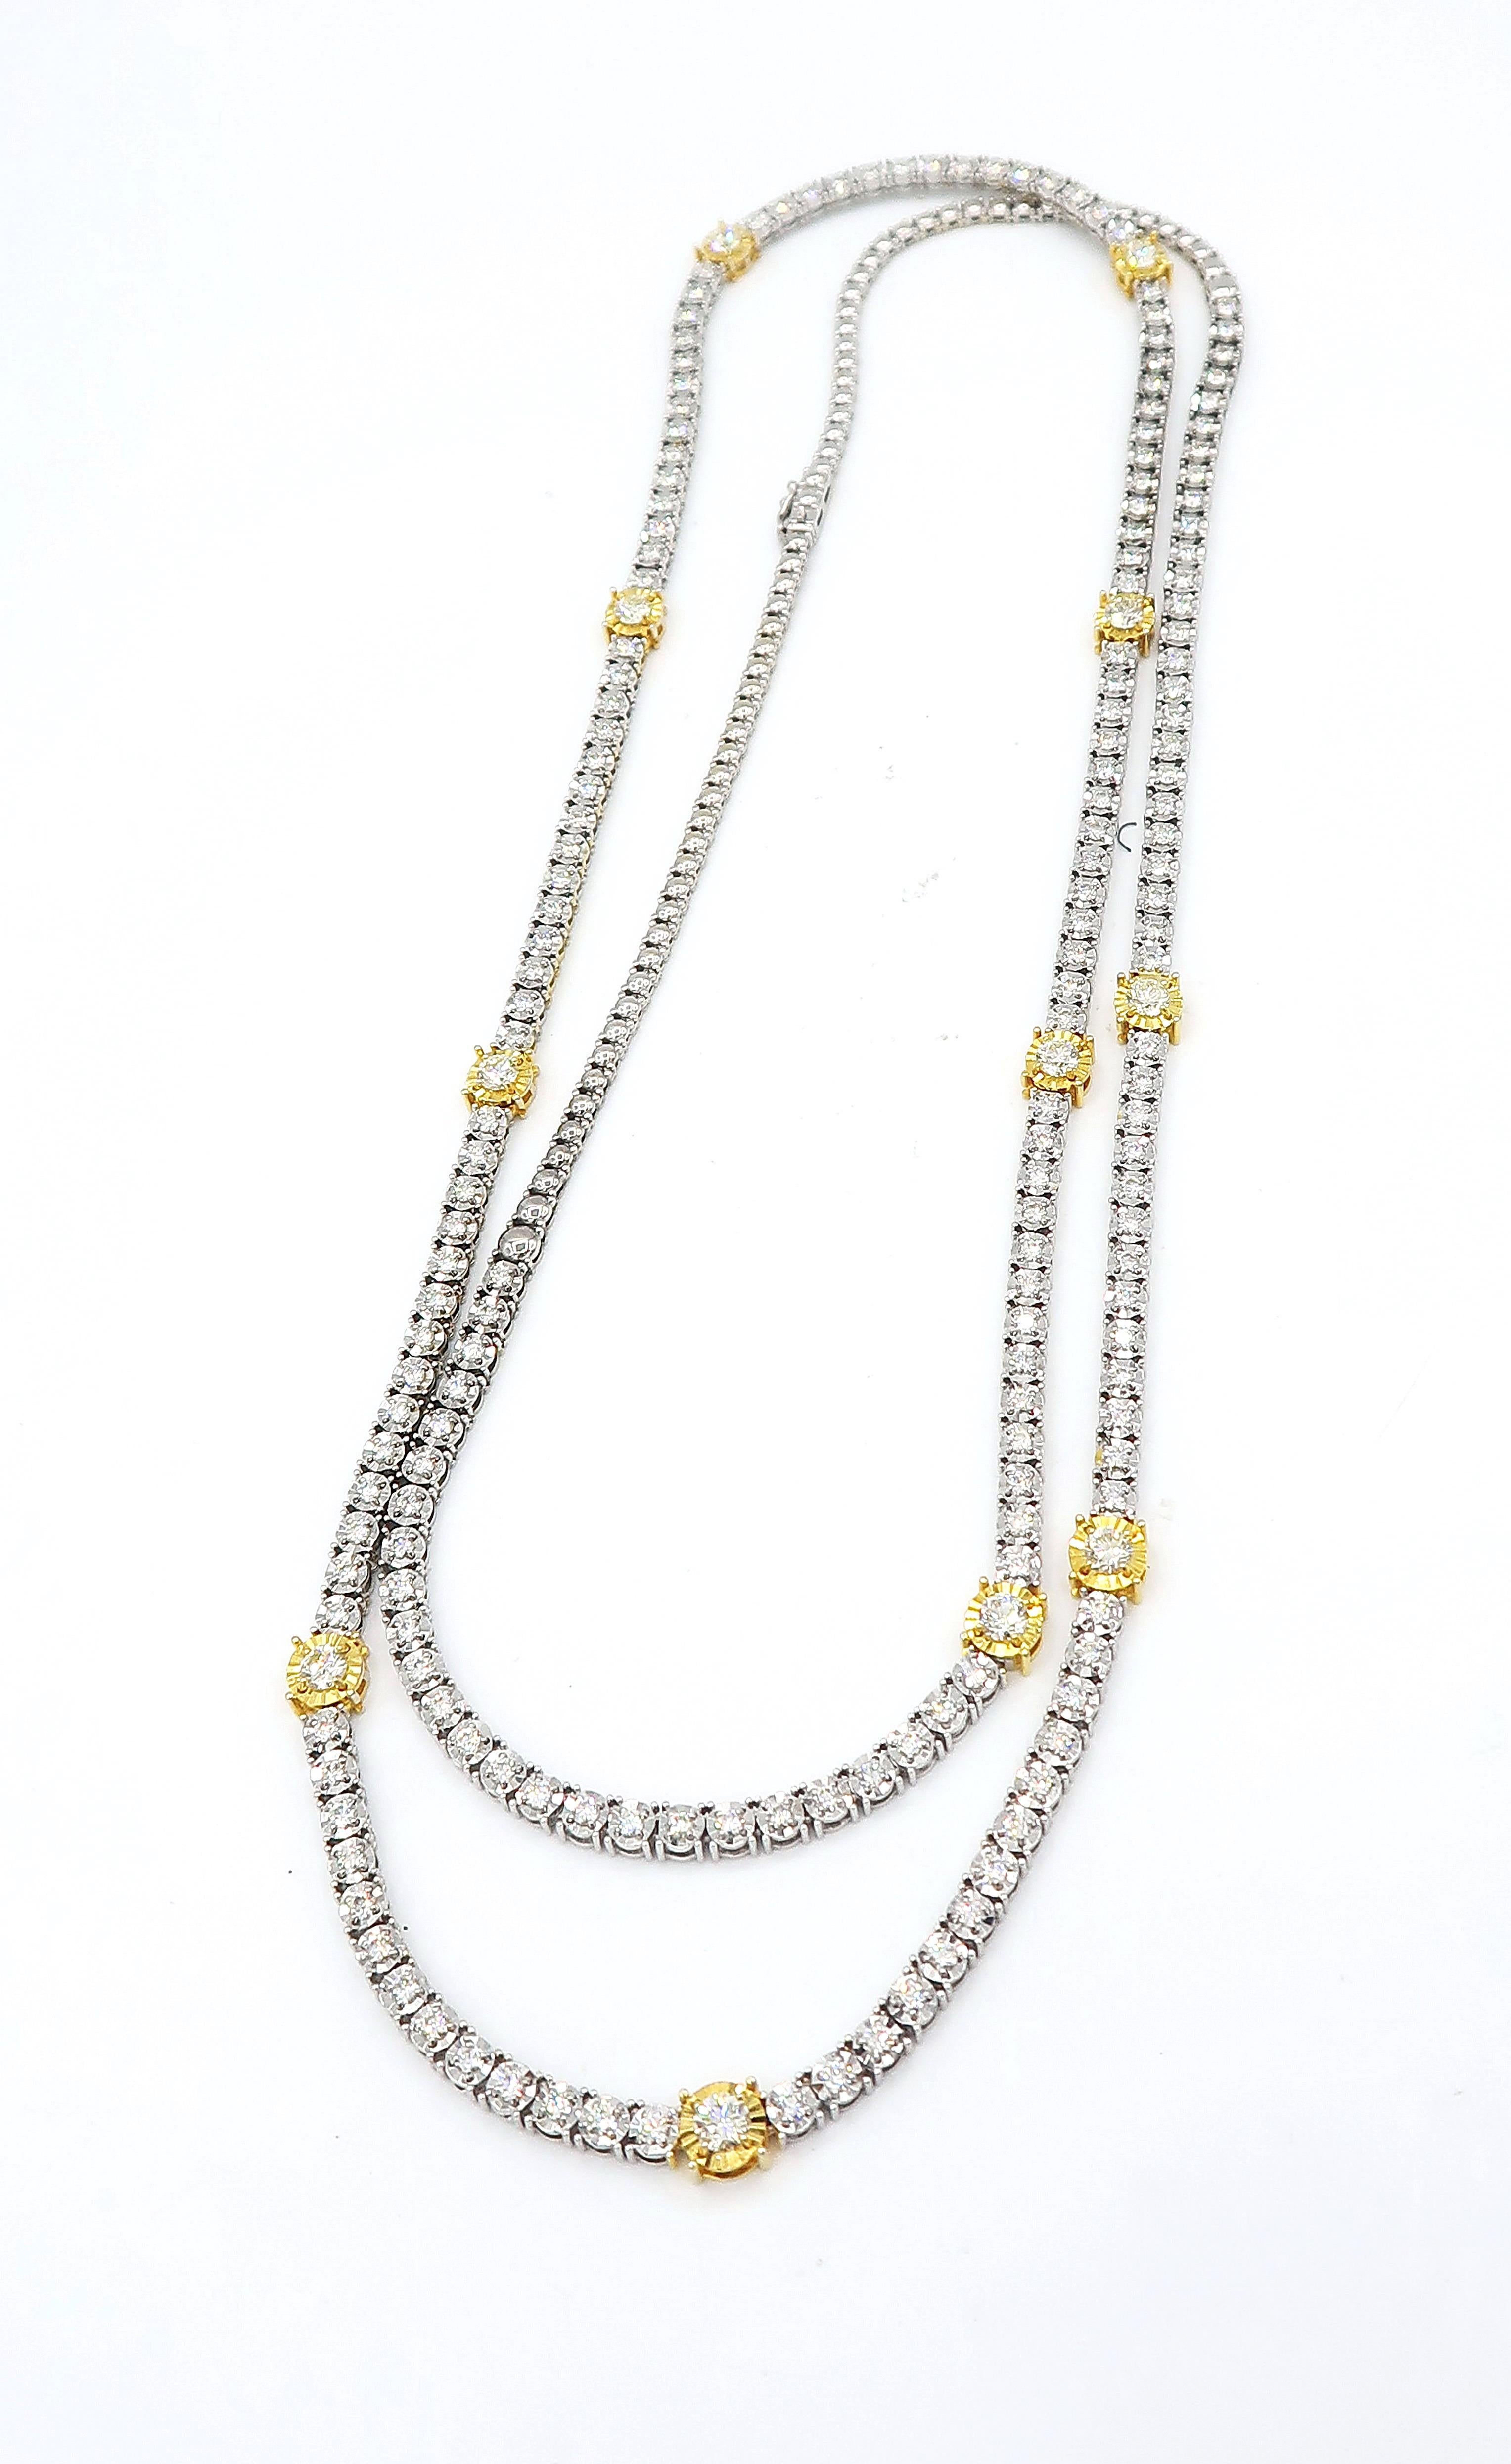 Enlarging Effect Diamond Long Throw-on Necklace with Clasp in 18K White and Yellow Gold

Diamond: 8.77 ct
Gold: 18K Gold, 54 g

Length: 36 inches